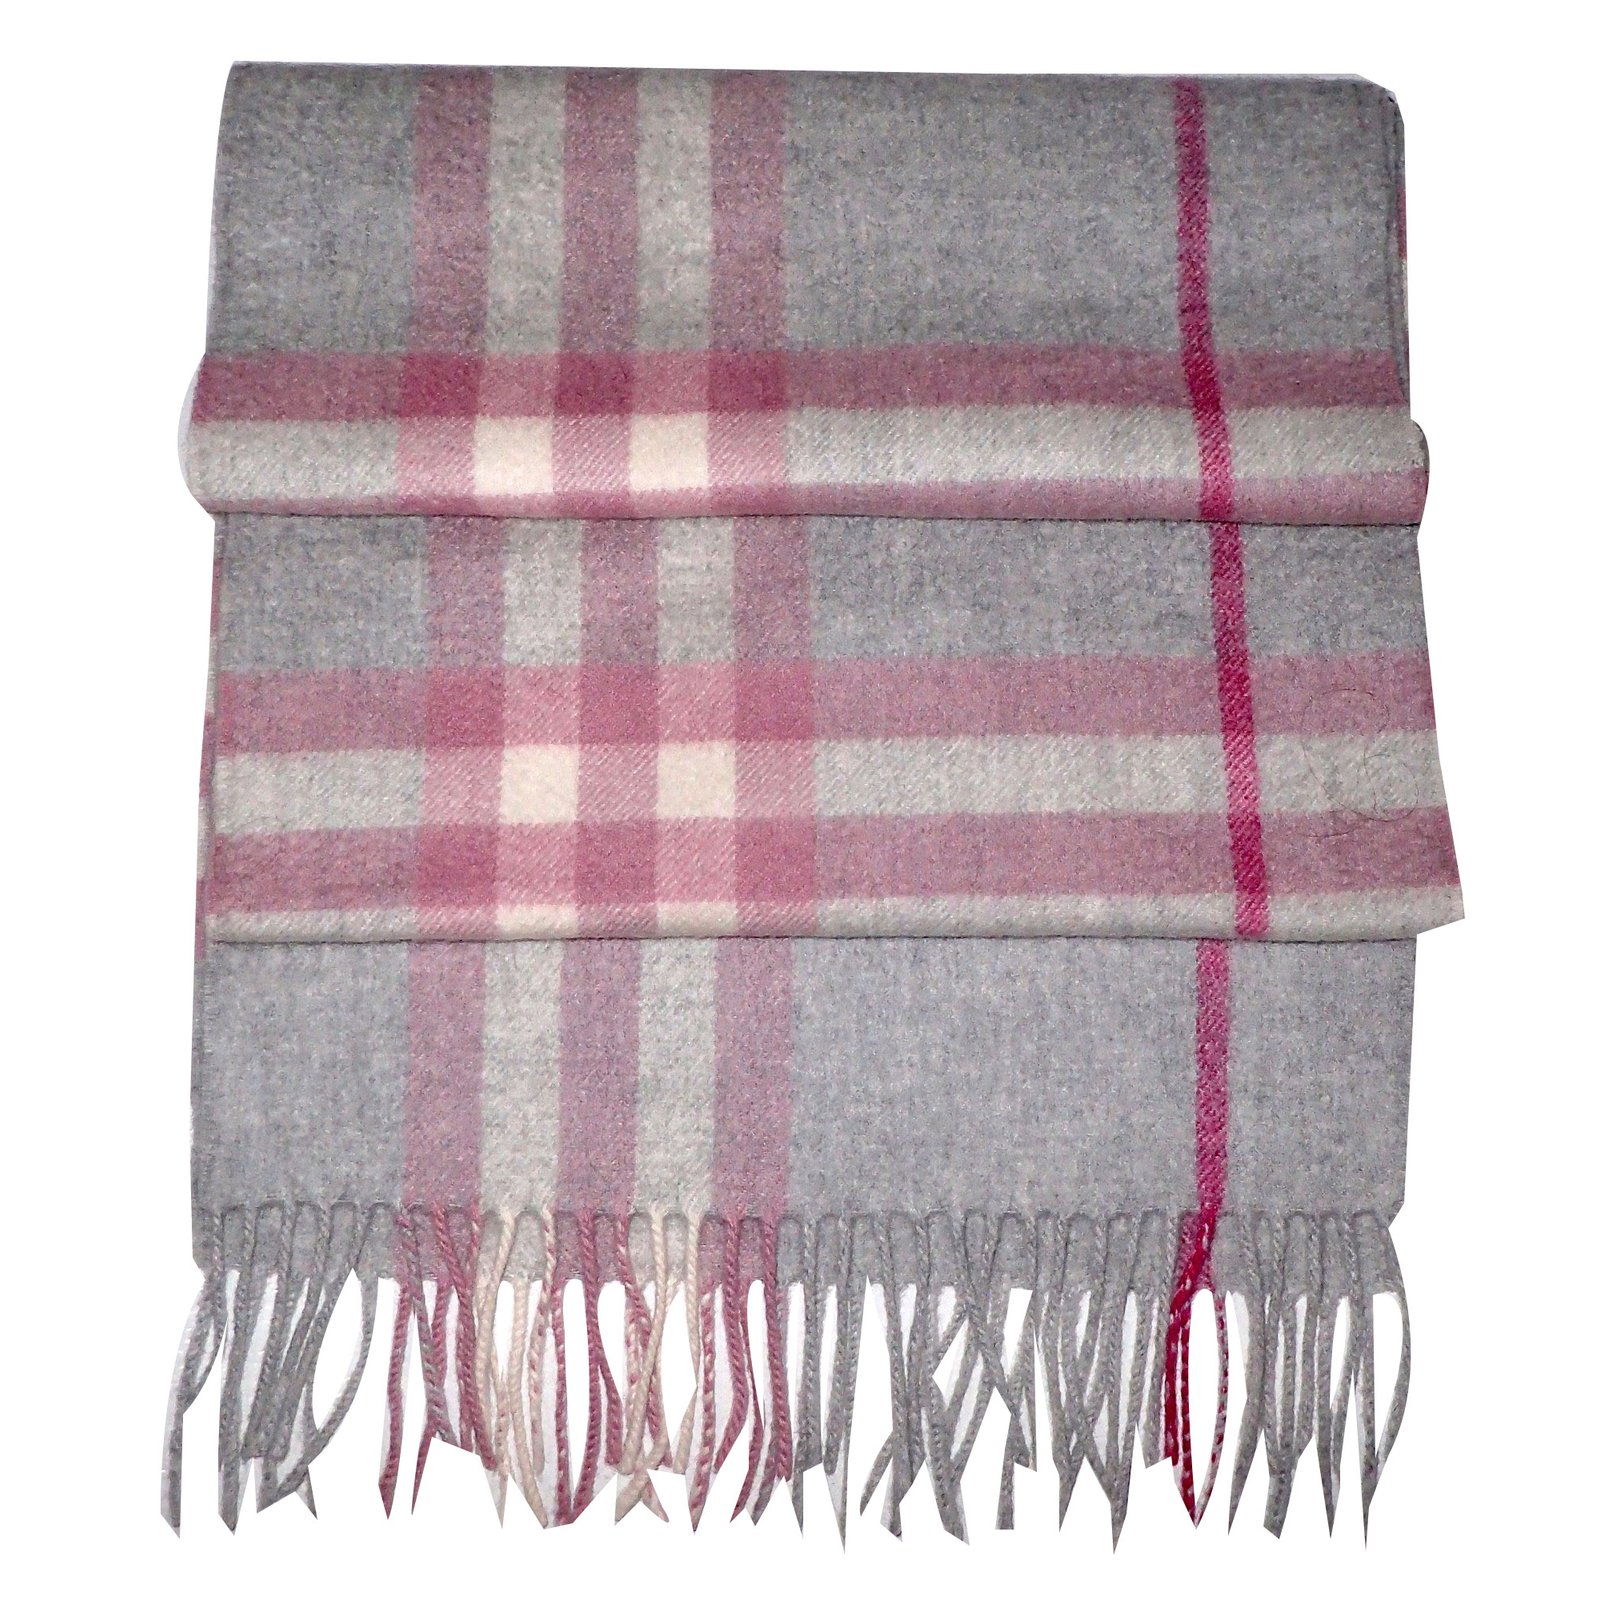 pink cashmere burberry scarf